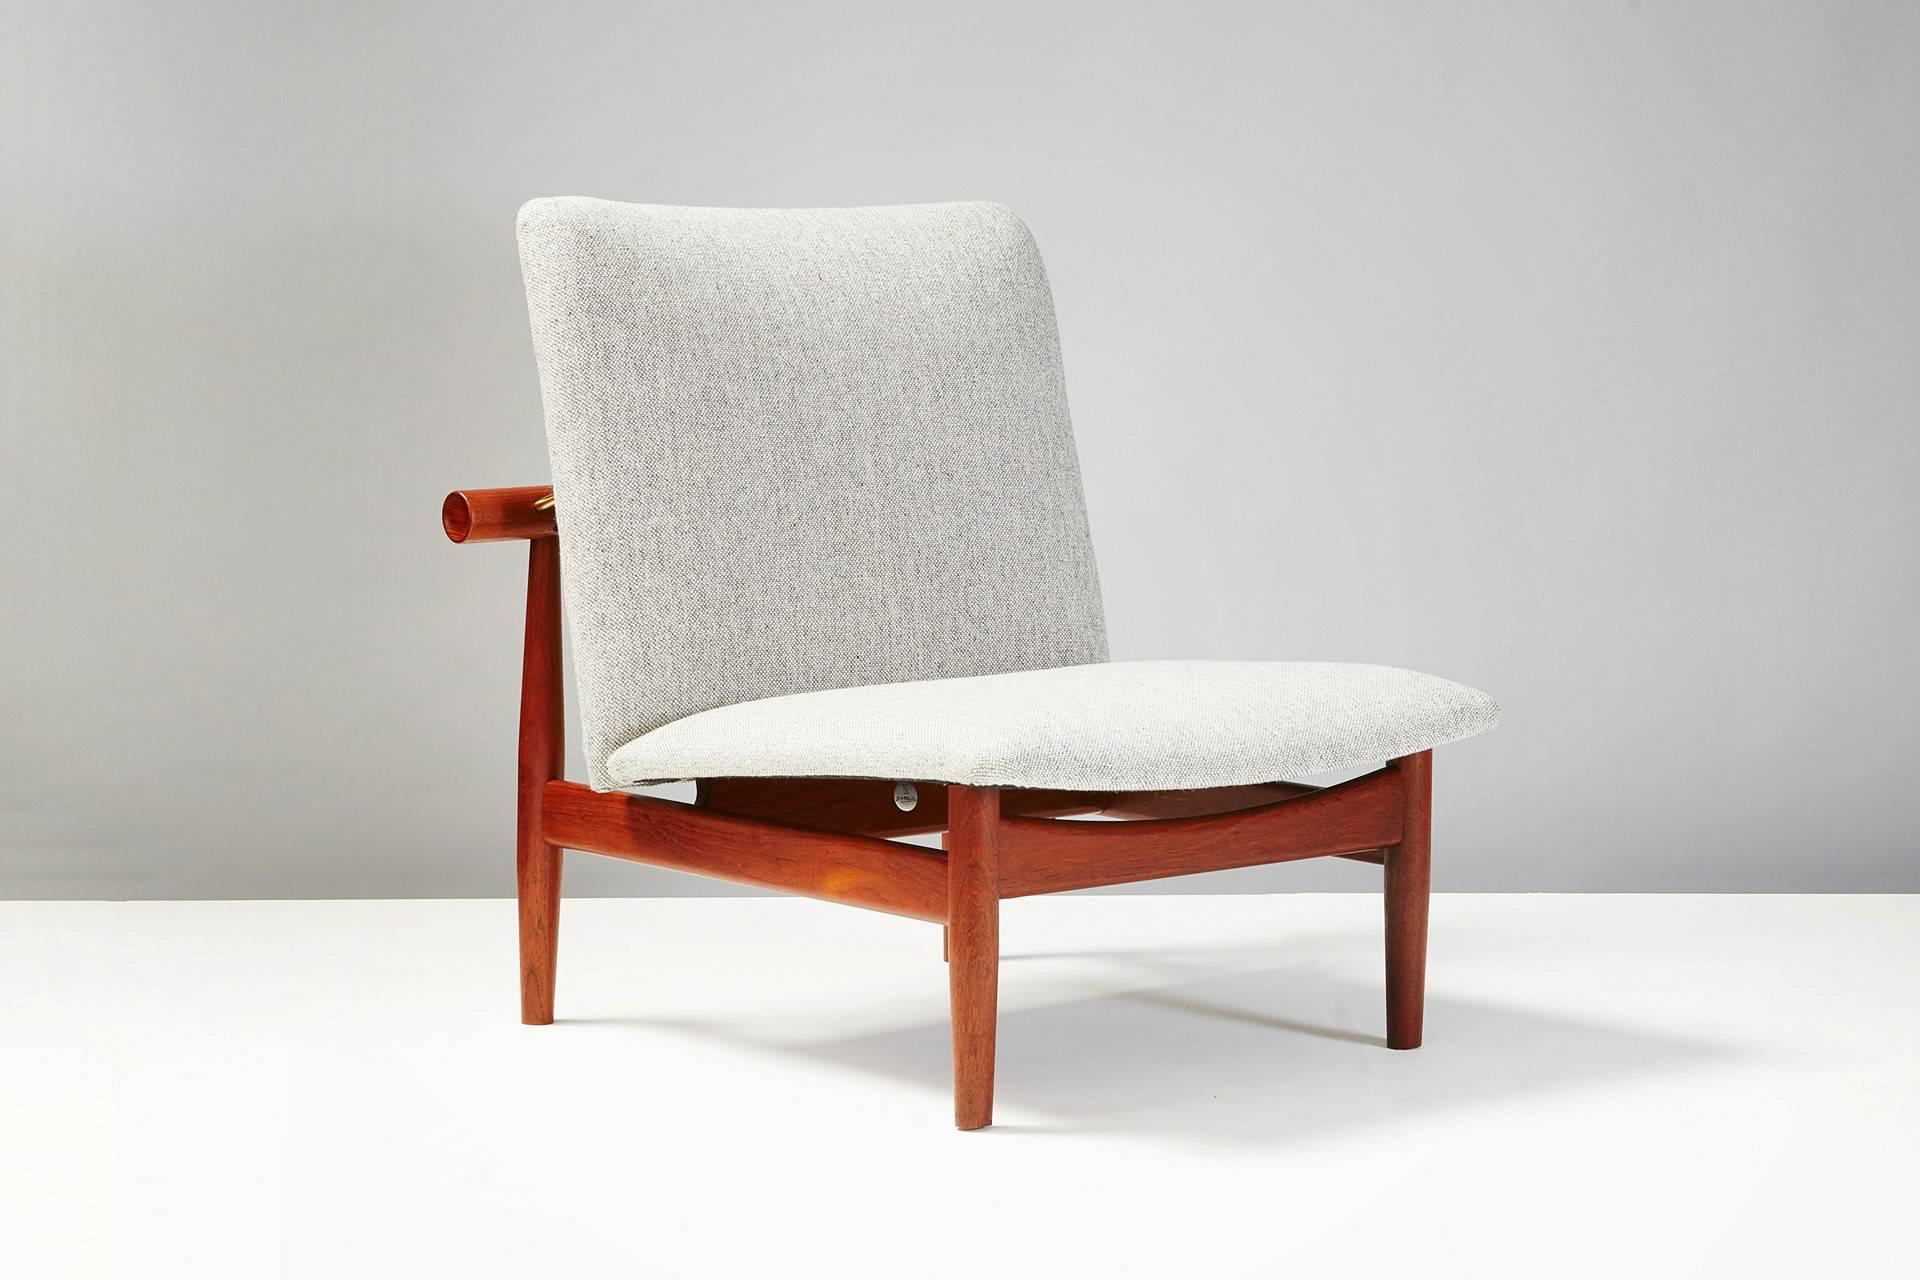 Produced by France & Son, Denmark. Solid teak frame, exposed brass fittings. Seat and back pad reupholstered in Kvadrat Divina wool fabric. Highly sought after model inspired by the Miyajima water gate near Hiroshima.